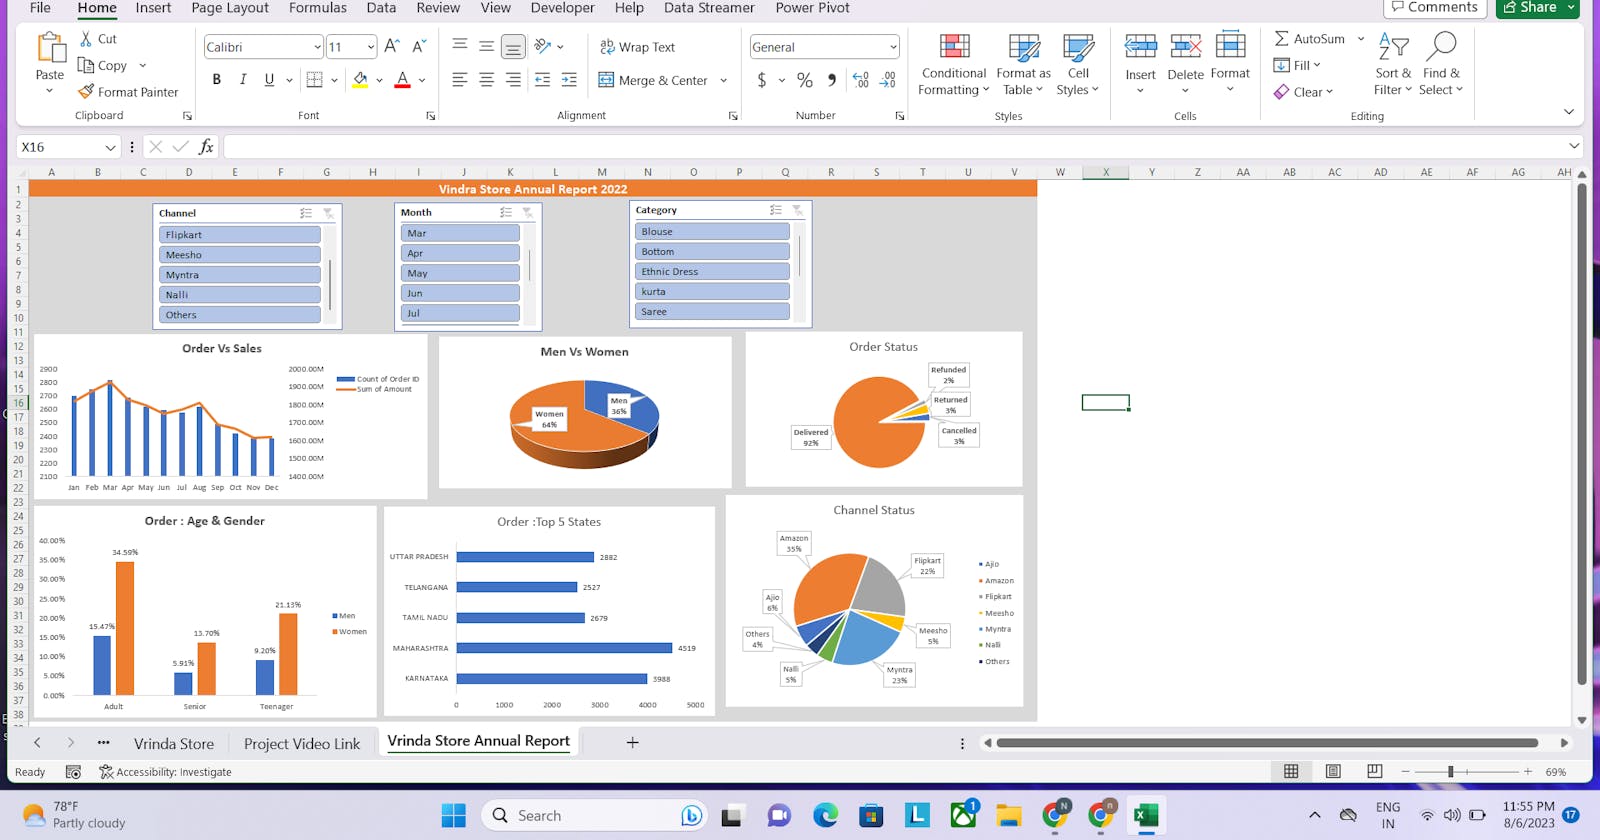 Data Analysis and Visualization in E-commerce using MS Excel: A Step-by-Step Guide